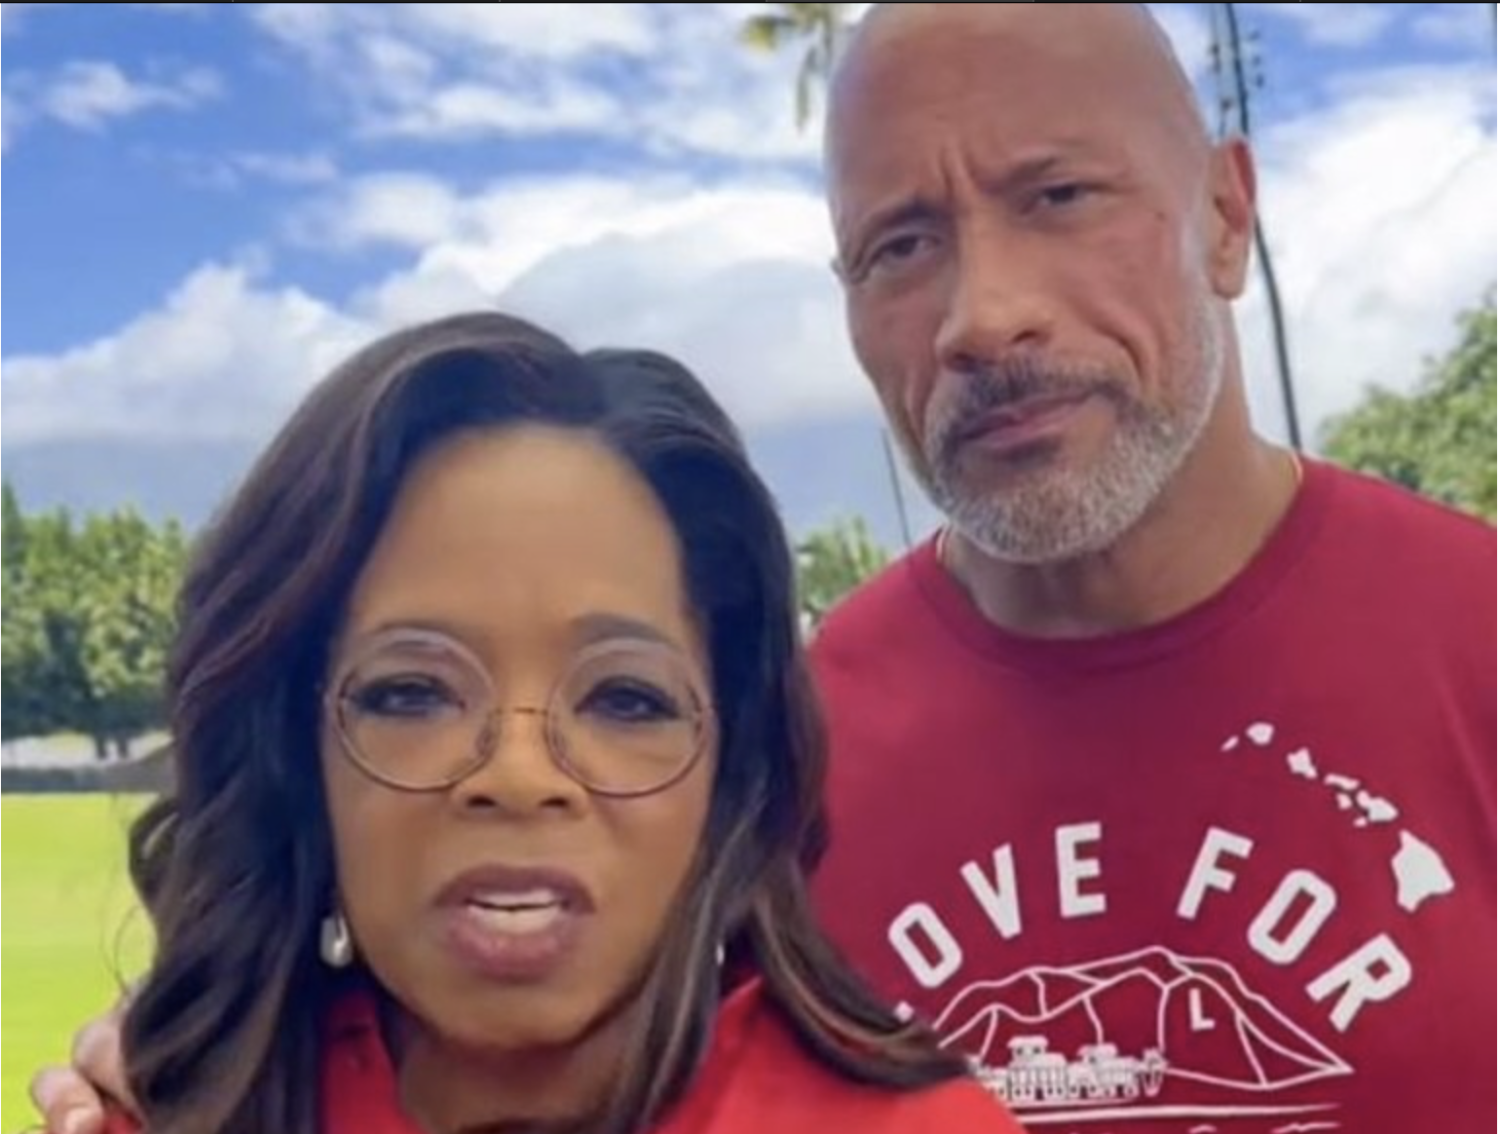 Oprah Winfrey and Dwayne 'The Rock' Johnson asking people to donate to those affected by the Maui wildfire. Picture: Dwayne Johnson/TikTok